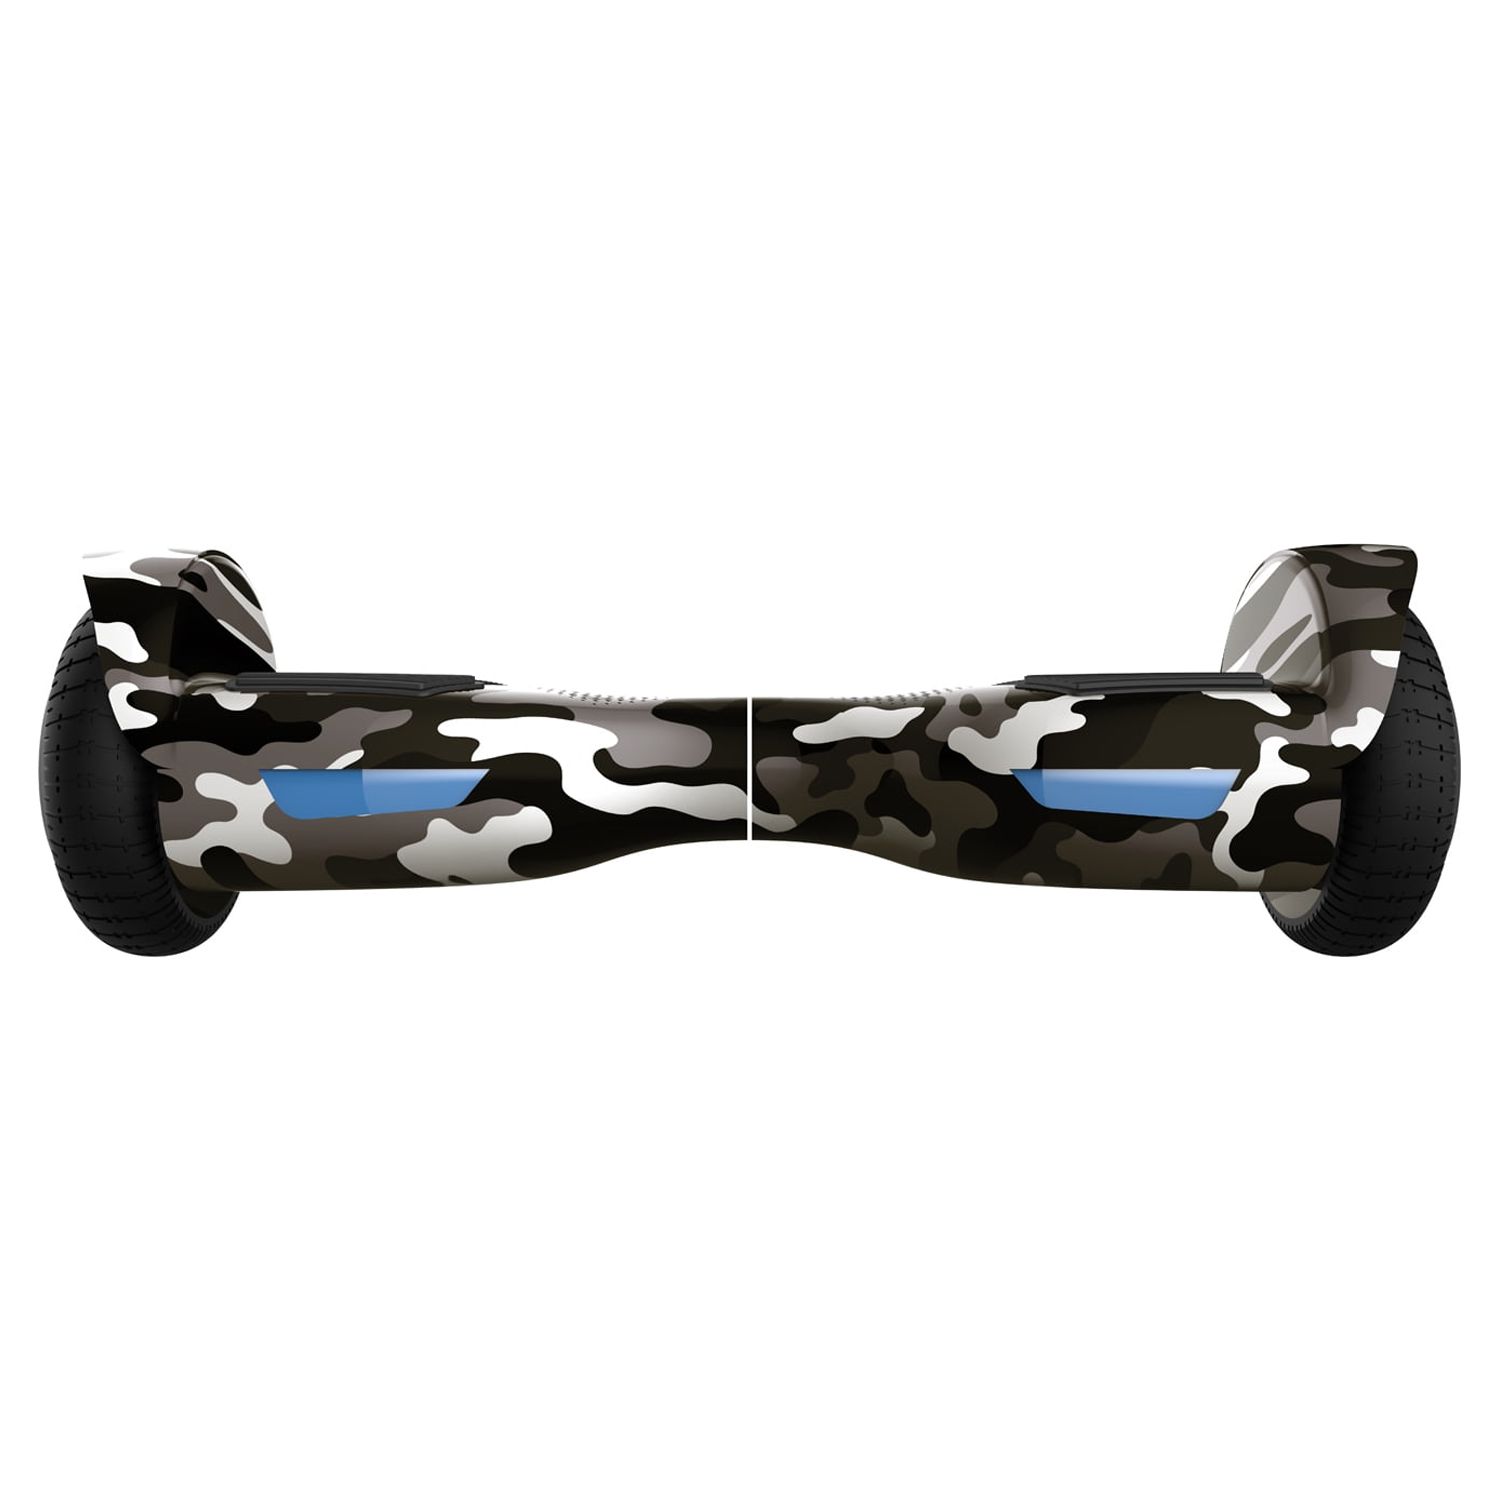 Hover-1 Helix UL Certified Electric Hoverboard with 6.5 In. LED Wheels, LED Sensor Lights, Bluetooth Speaker, Lithium-ion 10 Cell battery, Ages 8+, 160 Lbs Max Weight, Camouflage - image 2 of 10